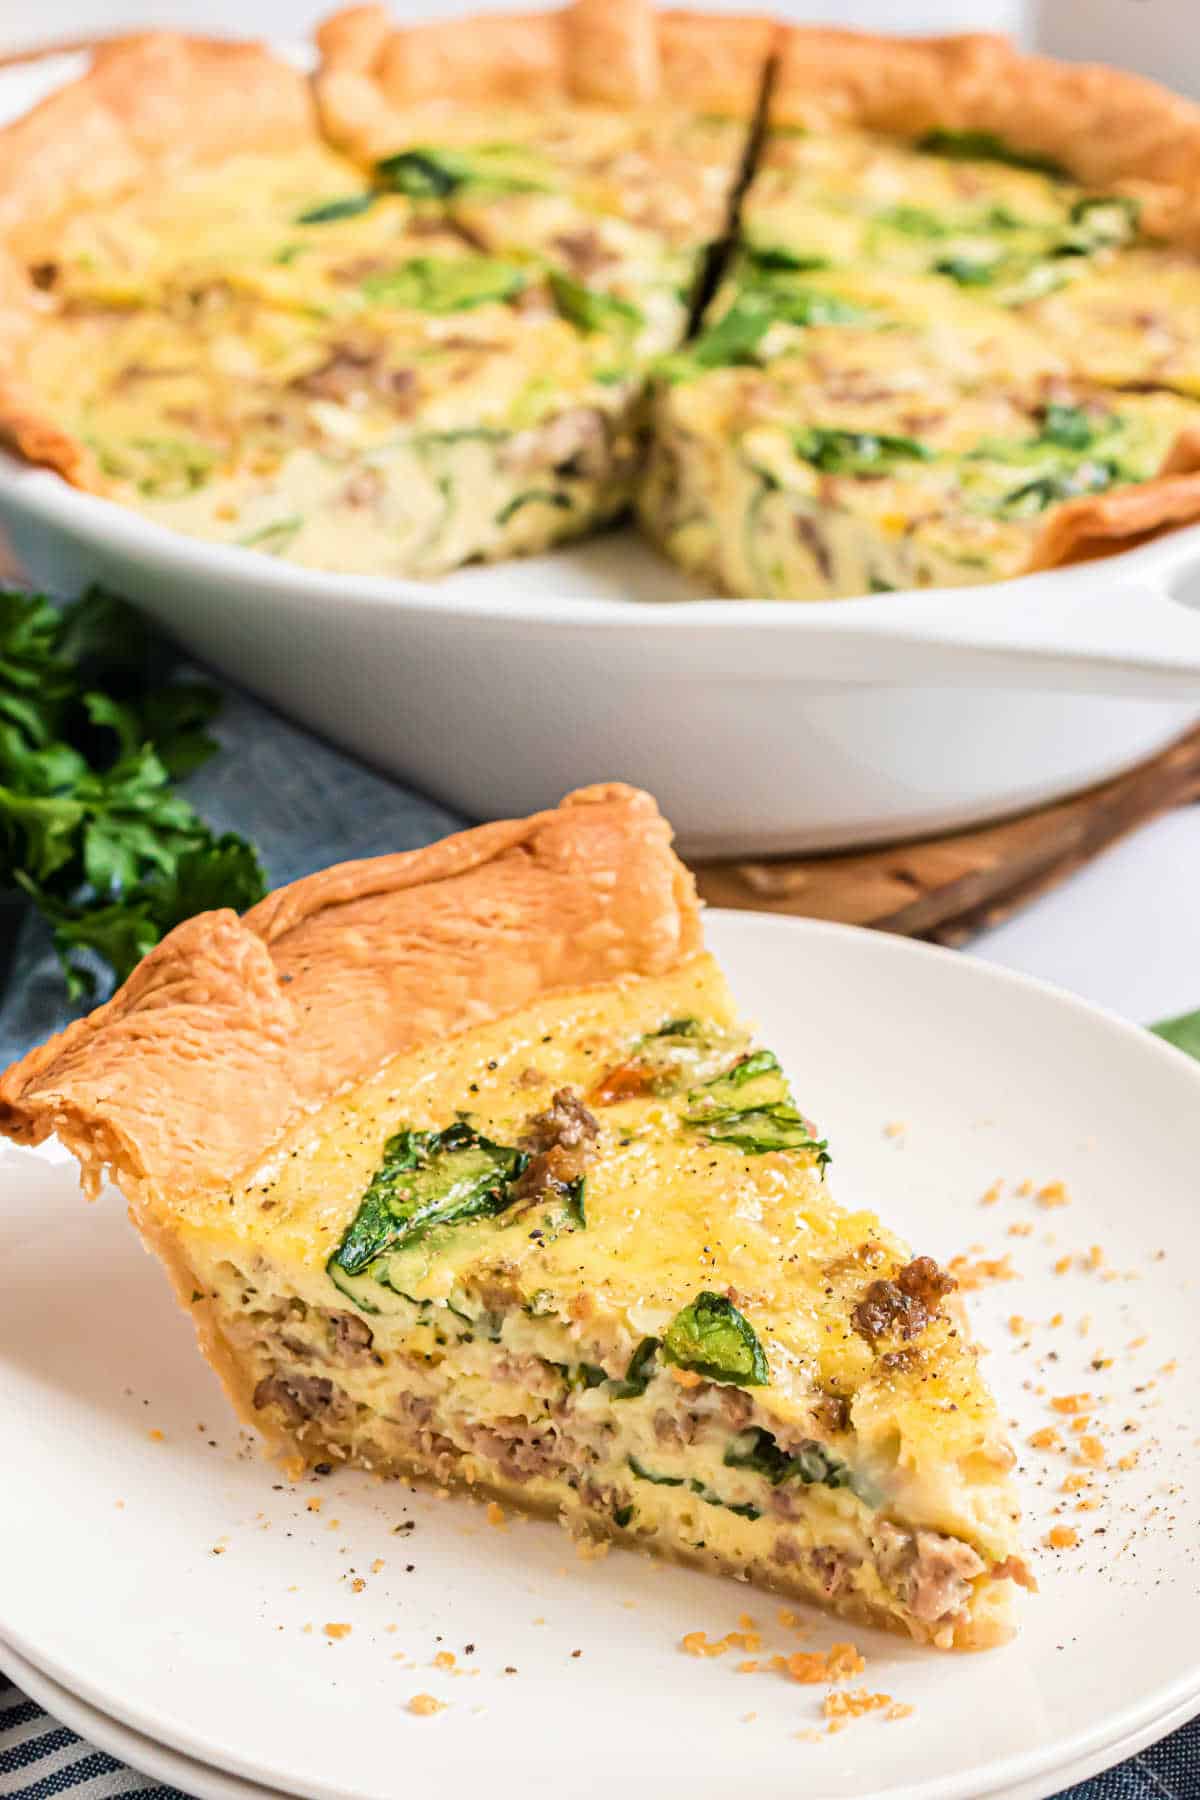 Spinach and Sausage Quiche - Shugary Sweets